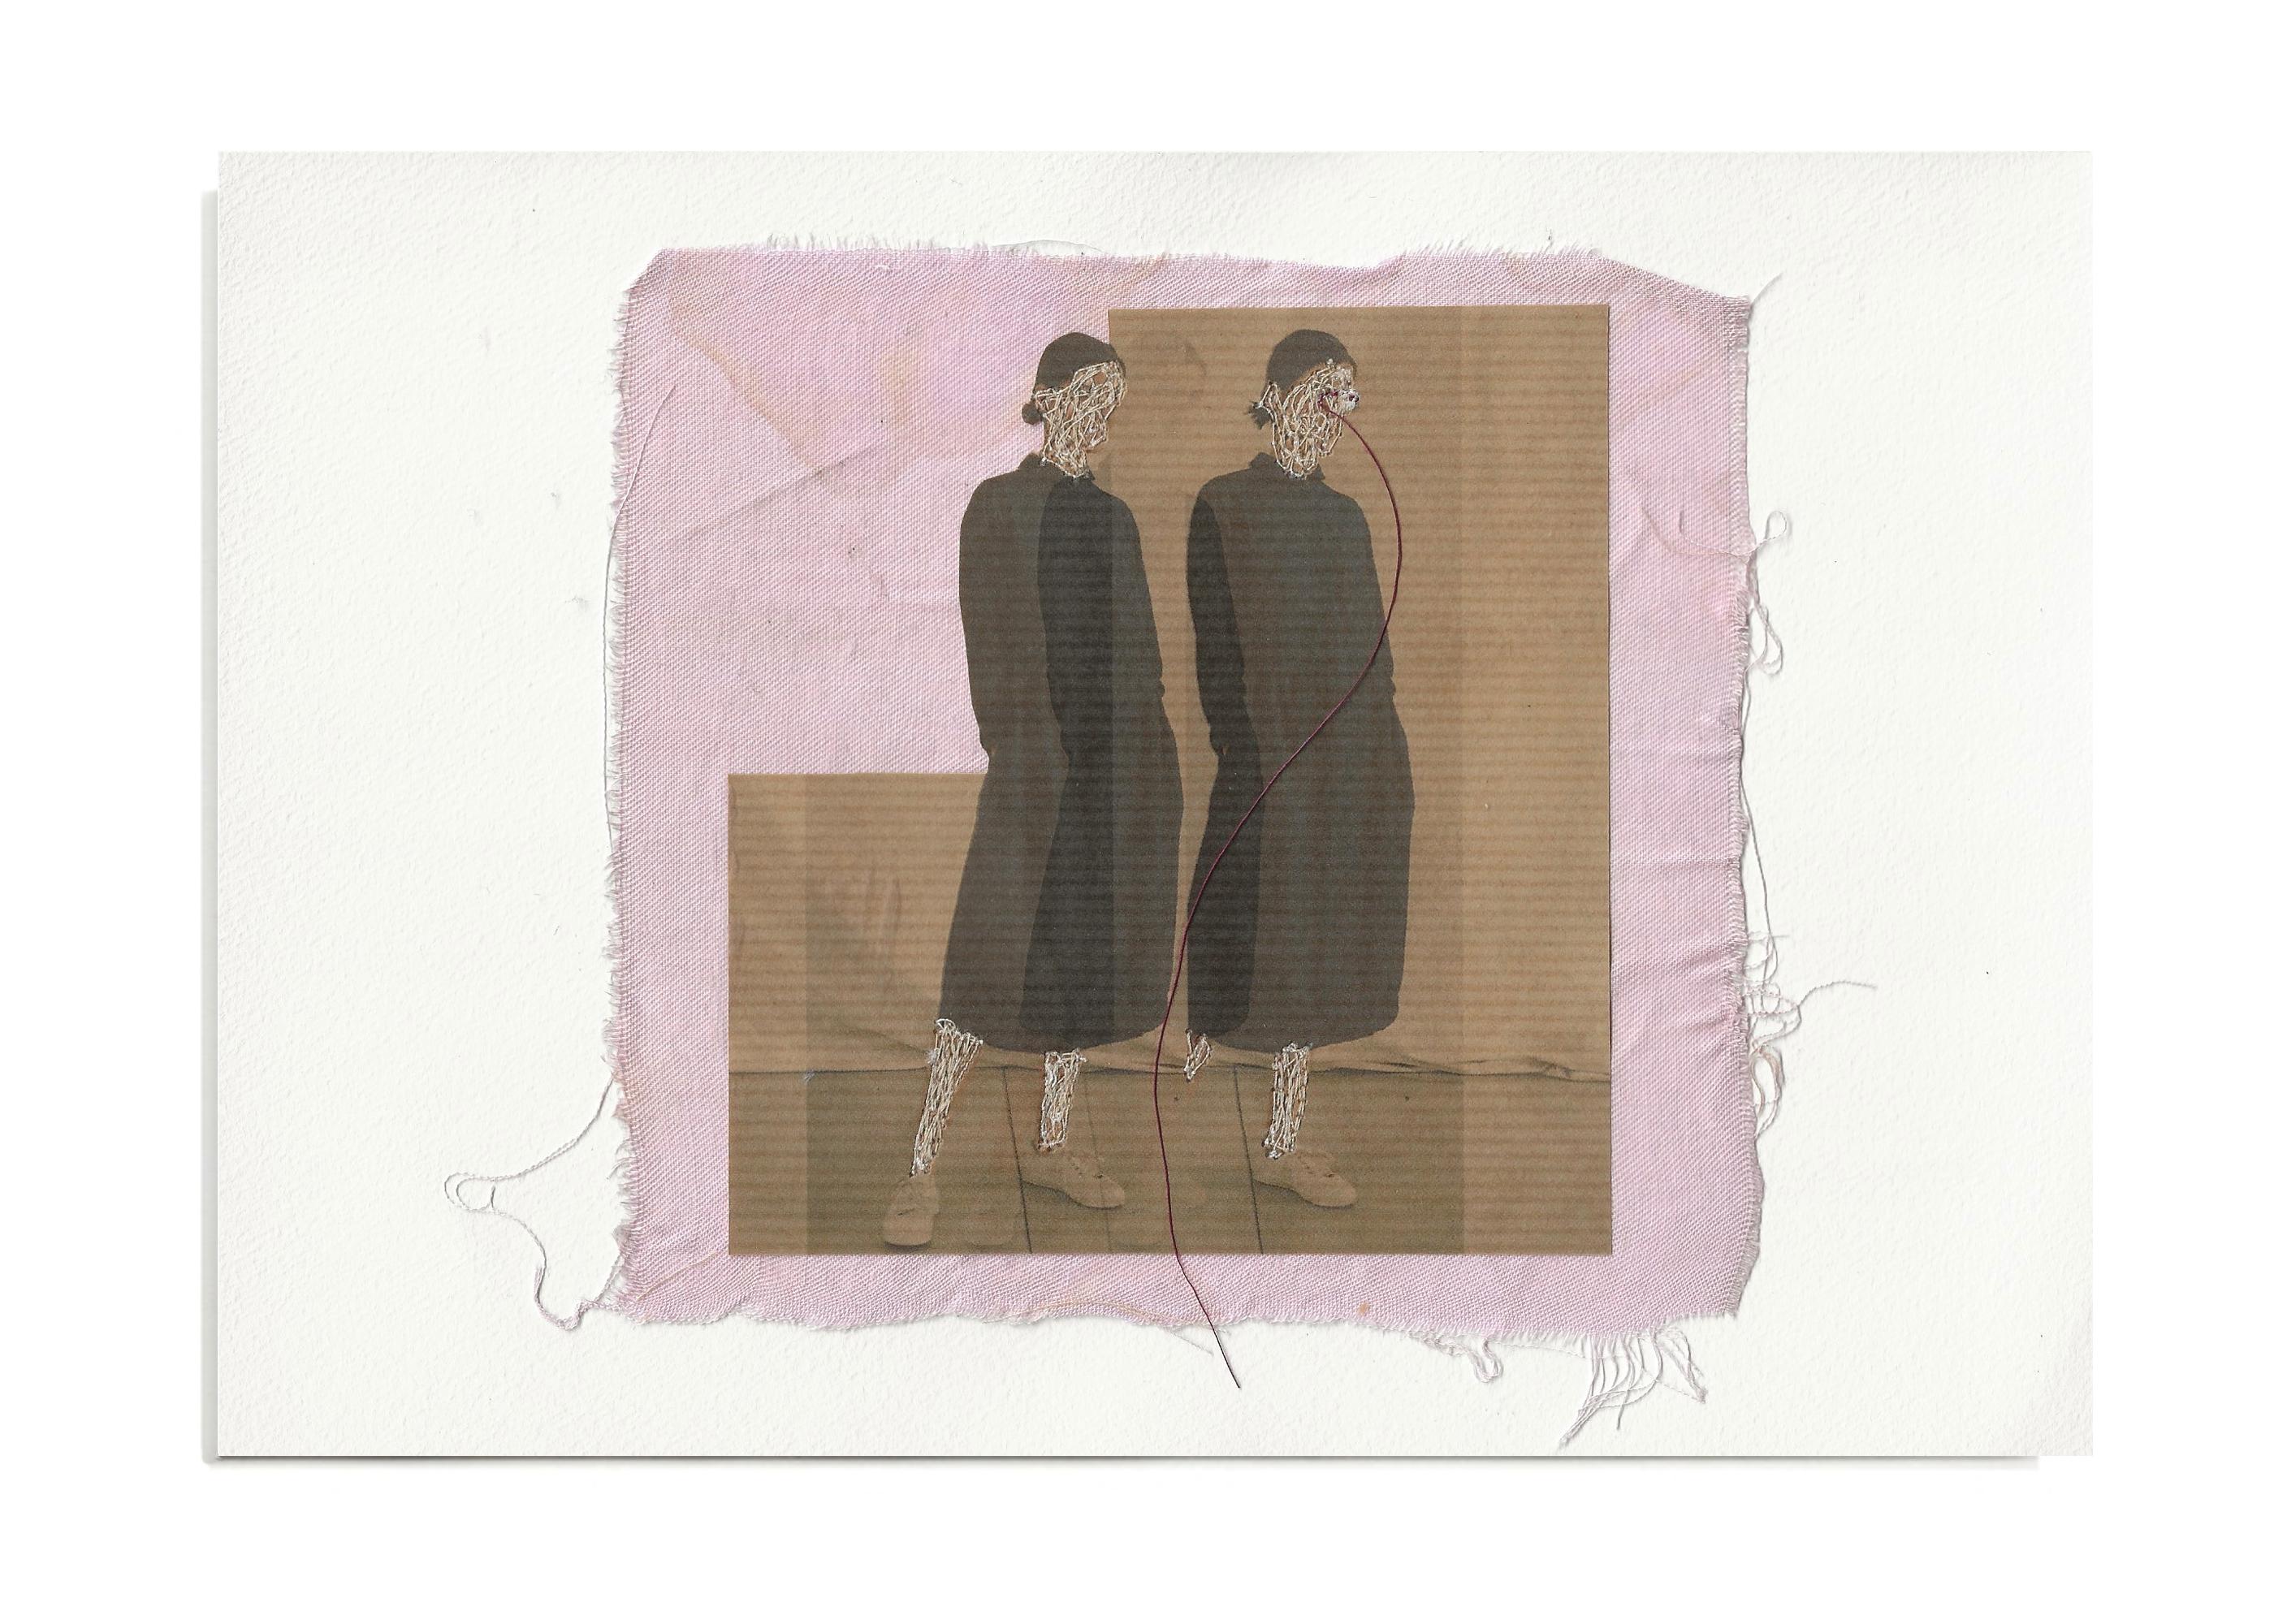 Michele Landel Figurative Photograph - She 54 - brown pink contemporary embroidered photo transfer of women on fabric